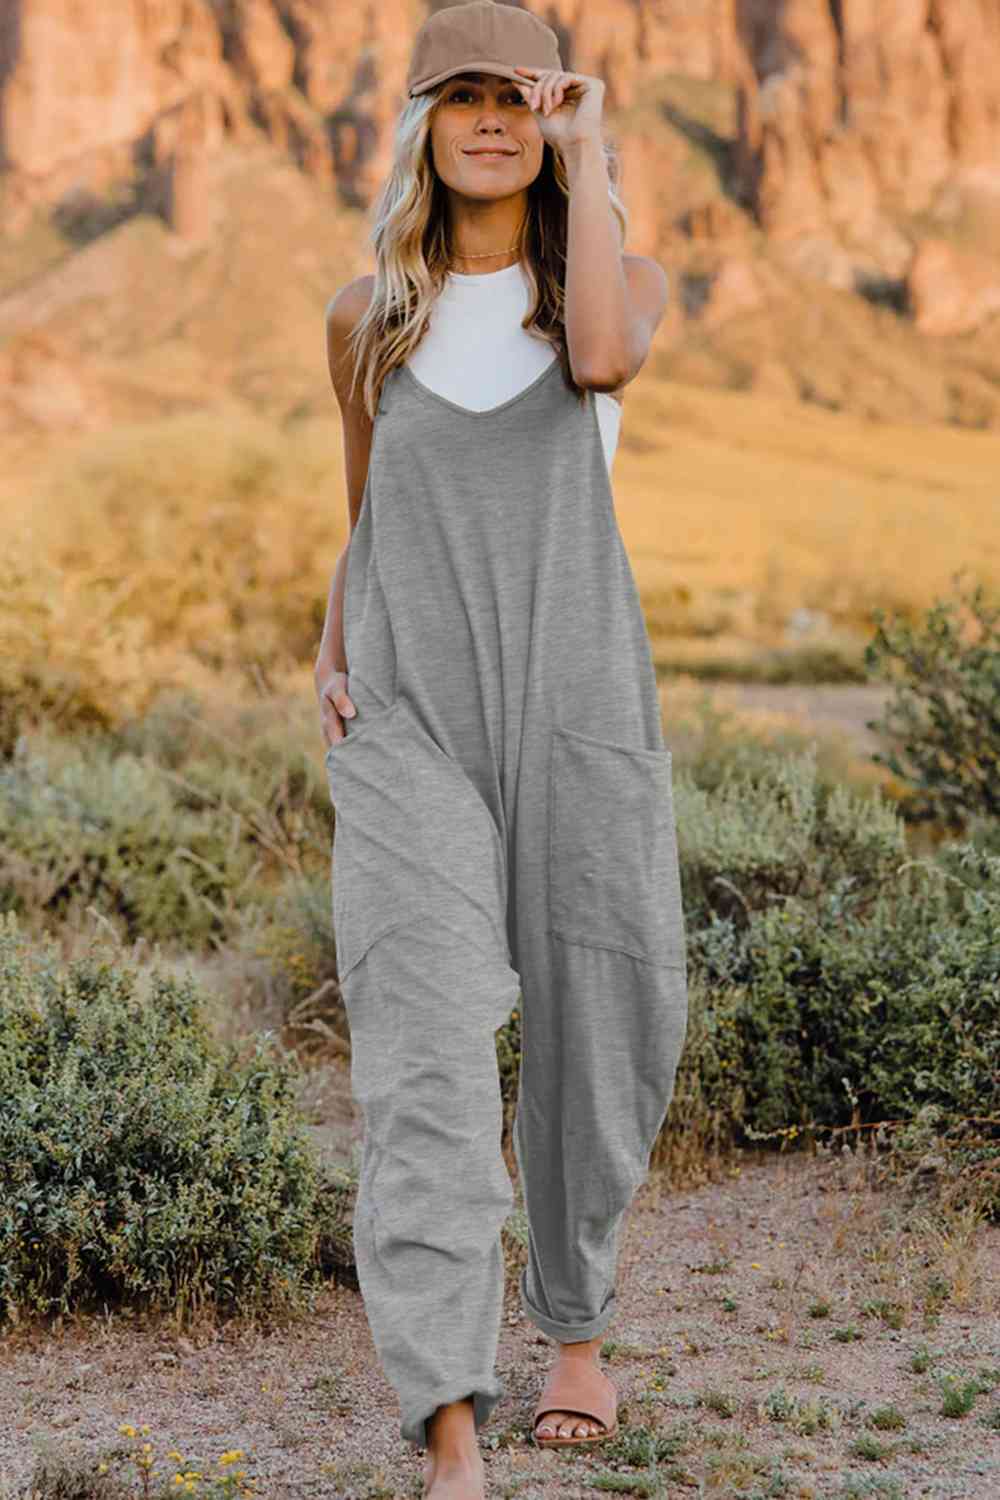 Double Take  V-Neck Sleeveless Jumpsuit with Pocket - The Teal Antler Boutique